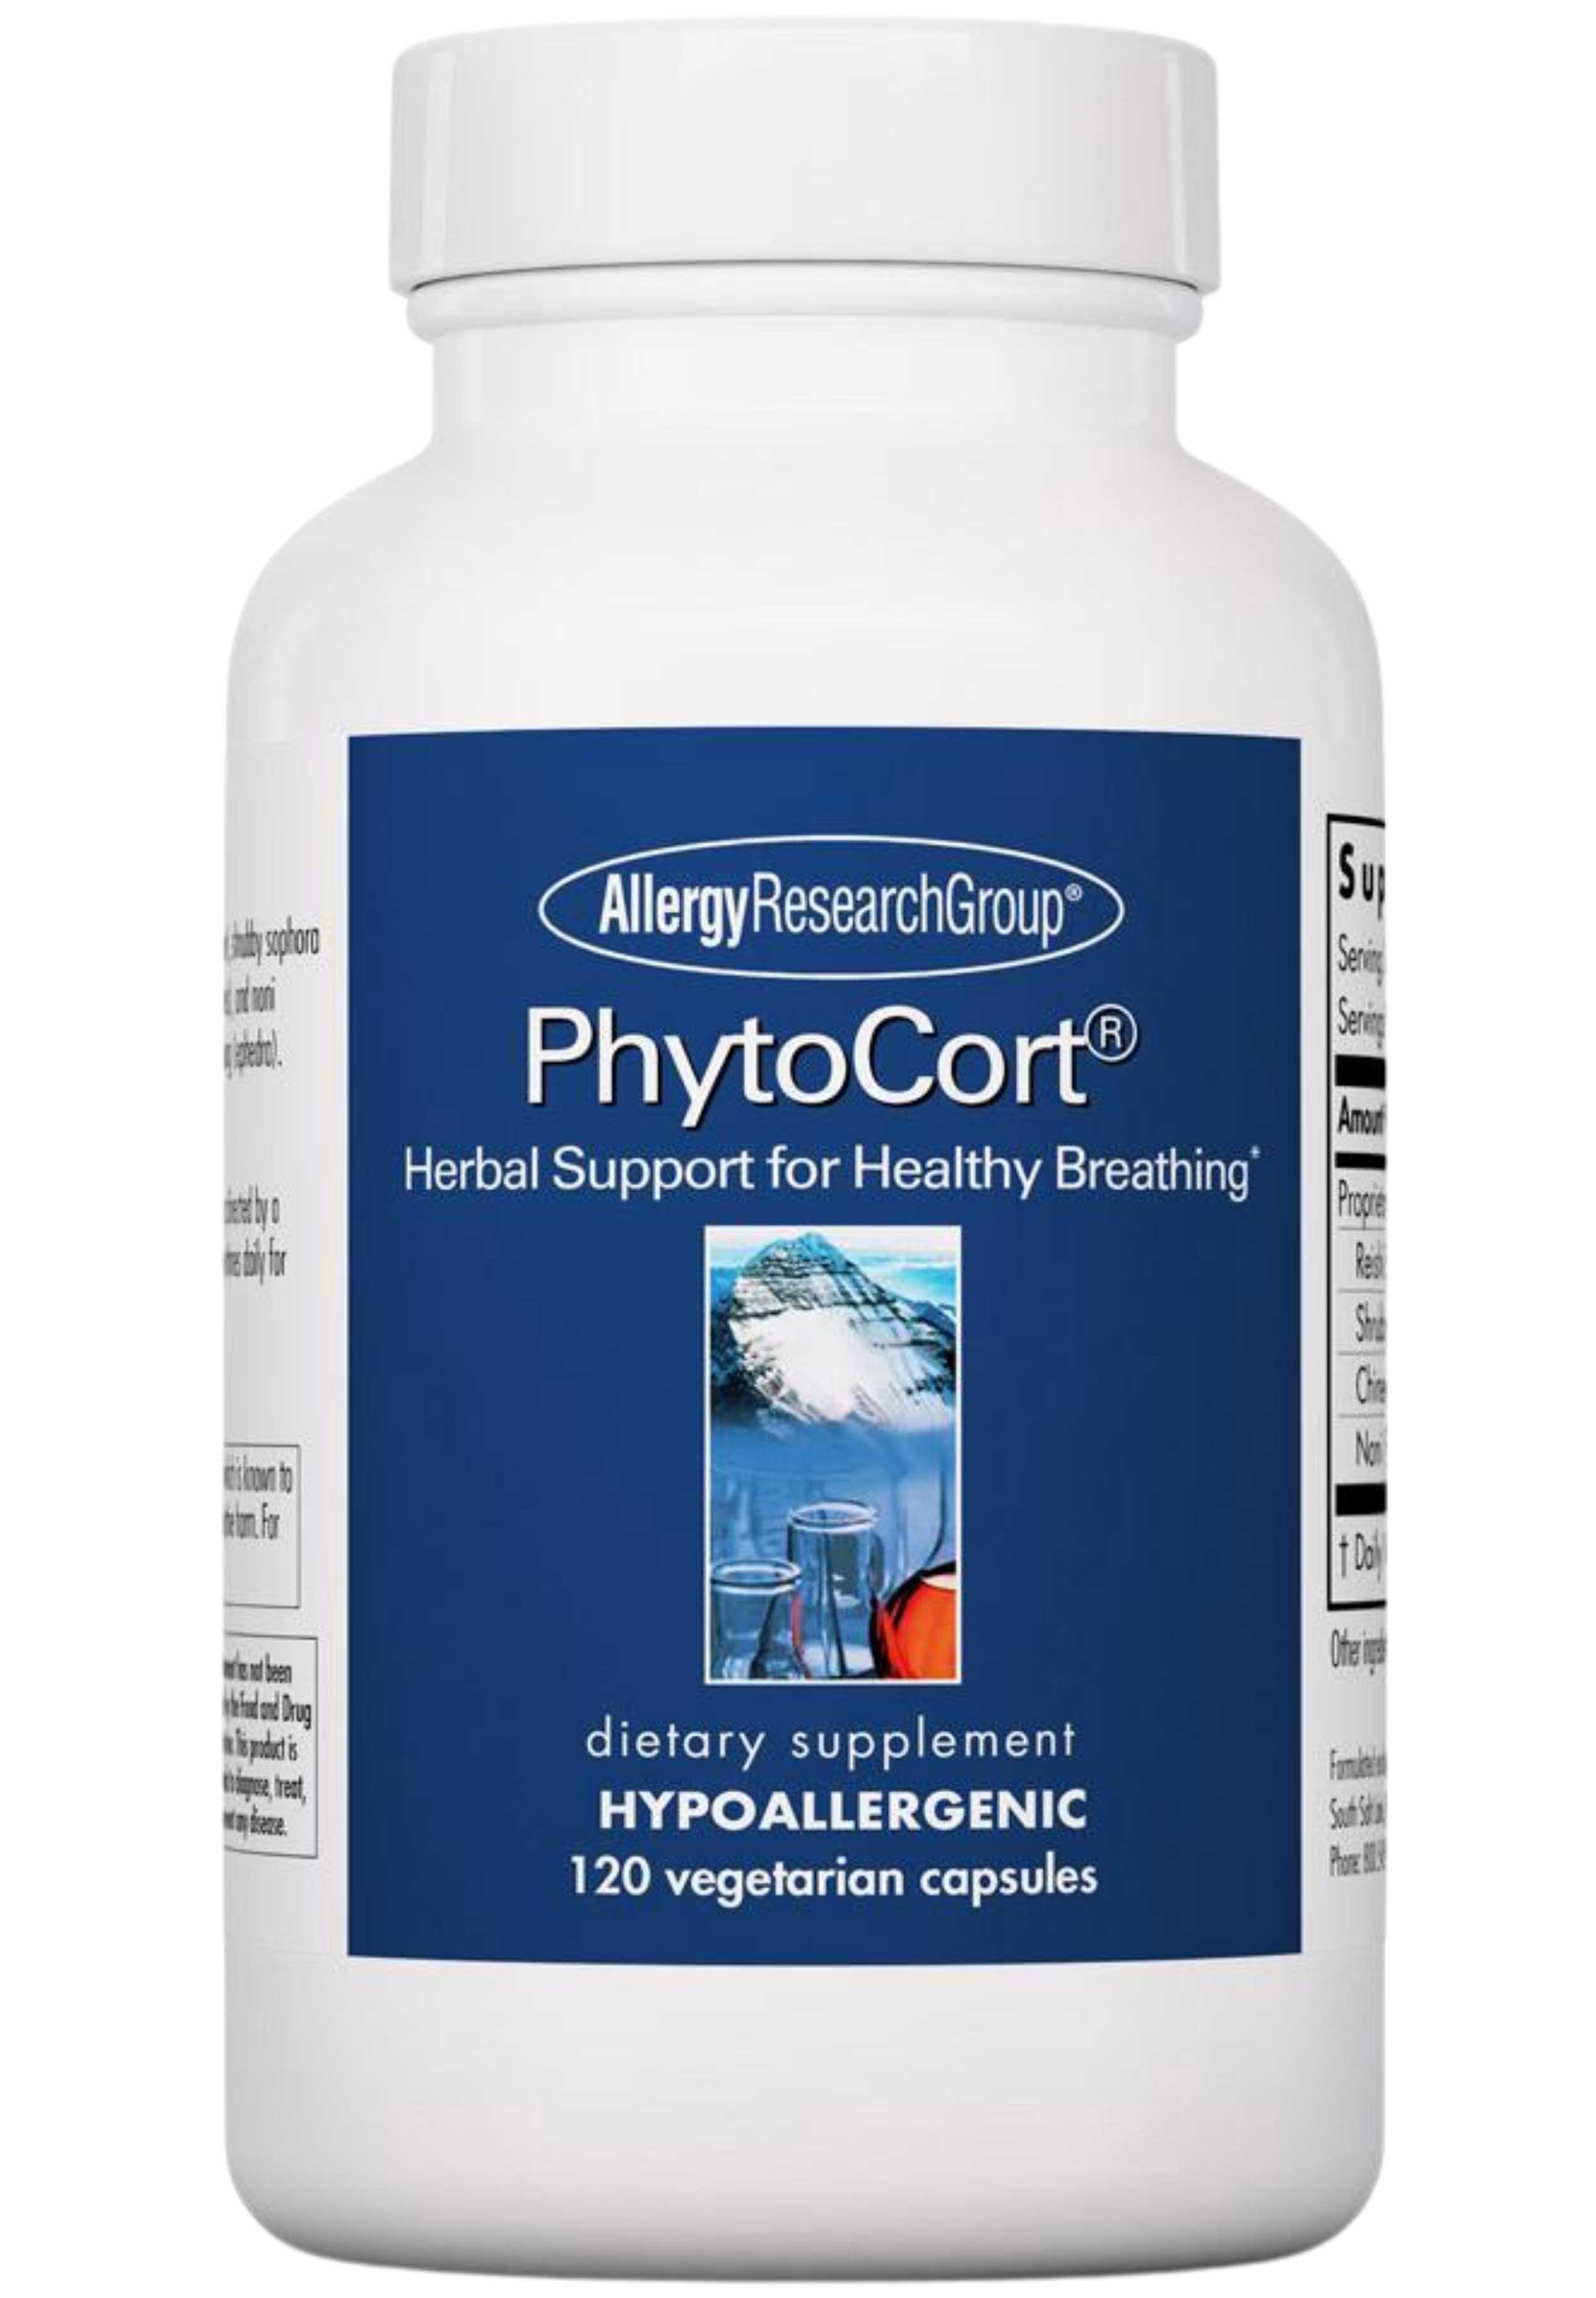 Allergy Research Group PhytoCort